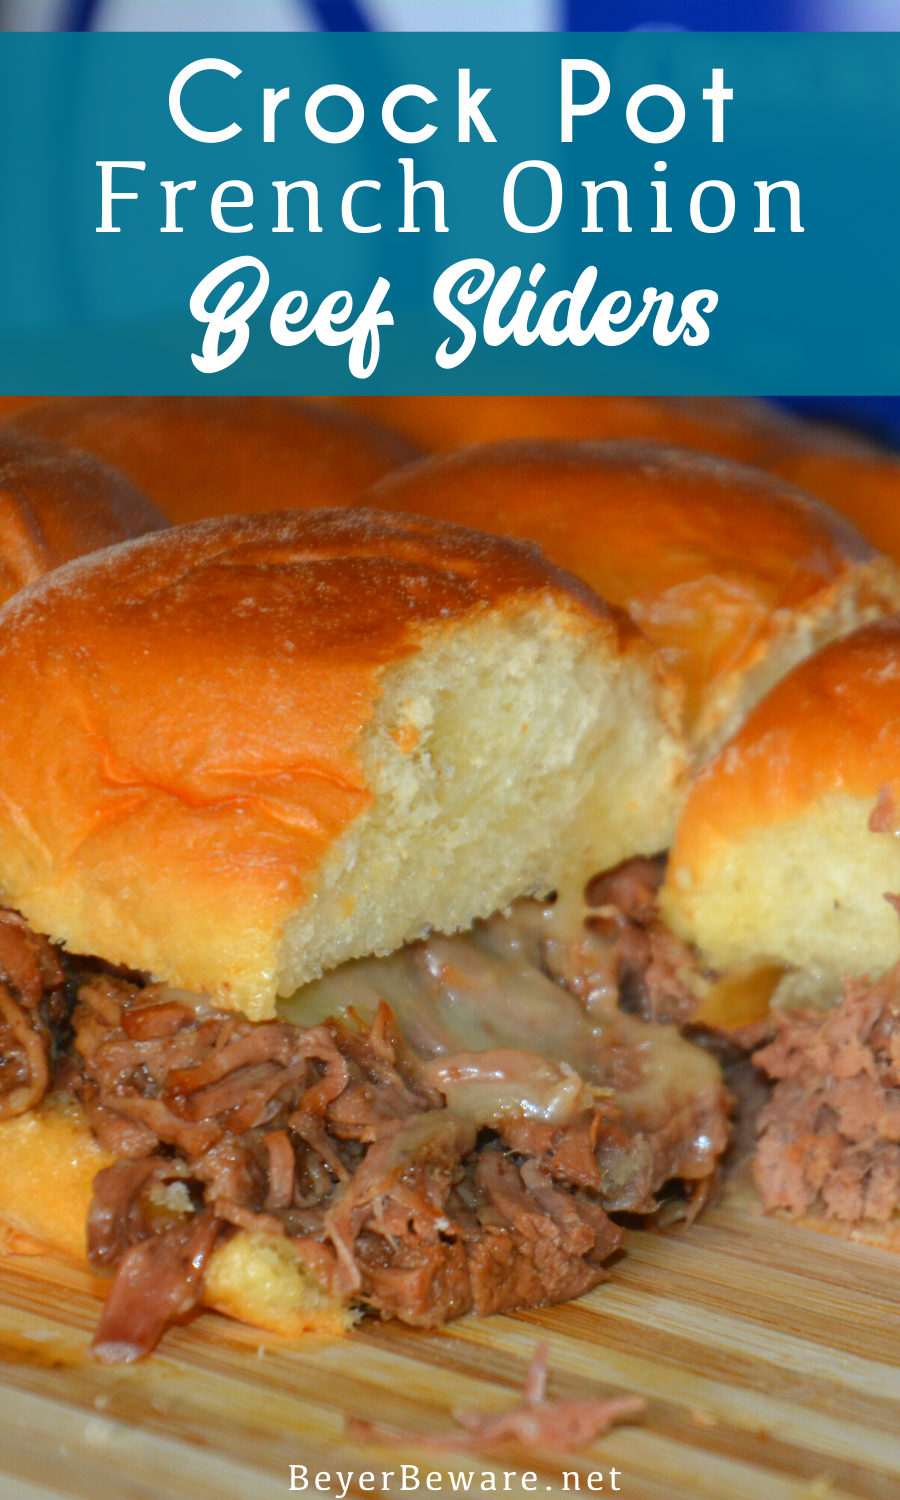 Crock Pot French onion beef sliders recipe is a shredded French onion beef roast made with canned French onion soup, onions, butter and beef broth used to make cheesy sliders on Hawaiian rolls.